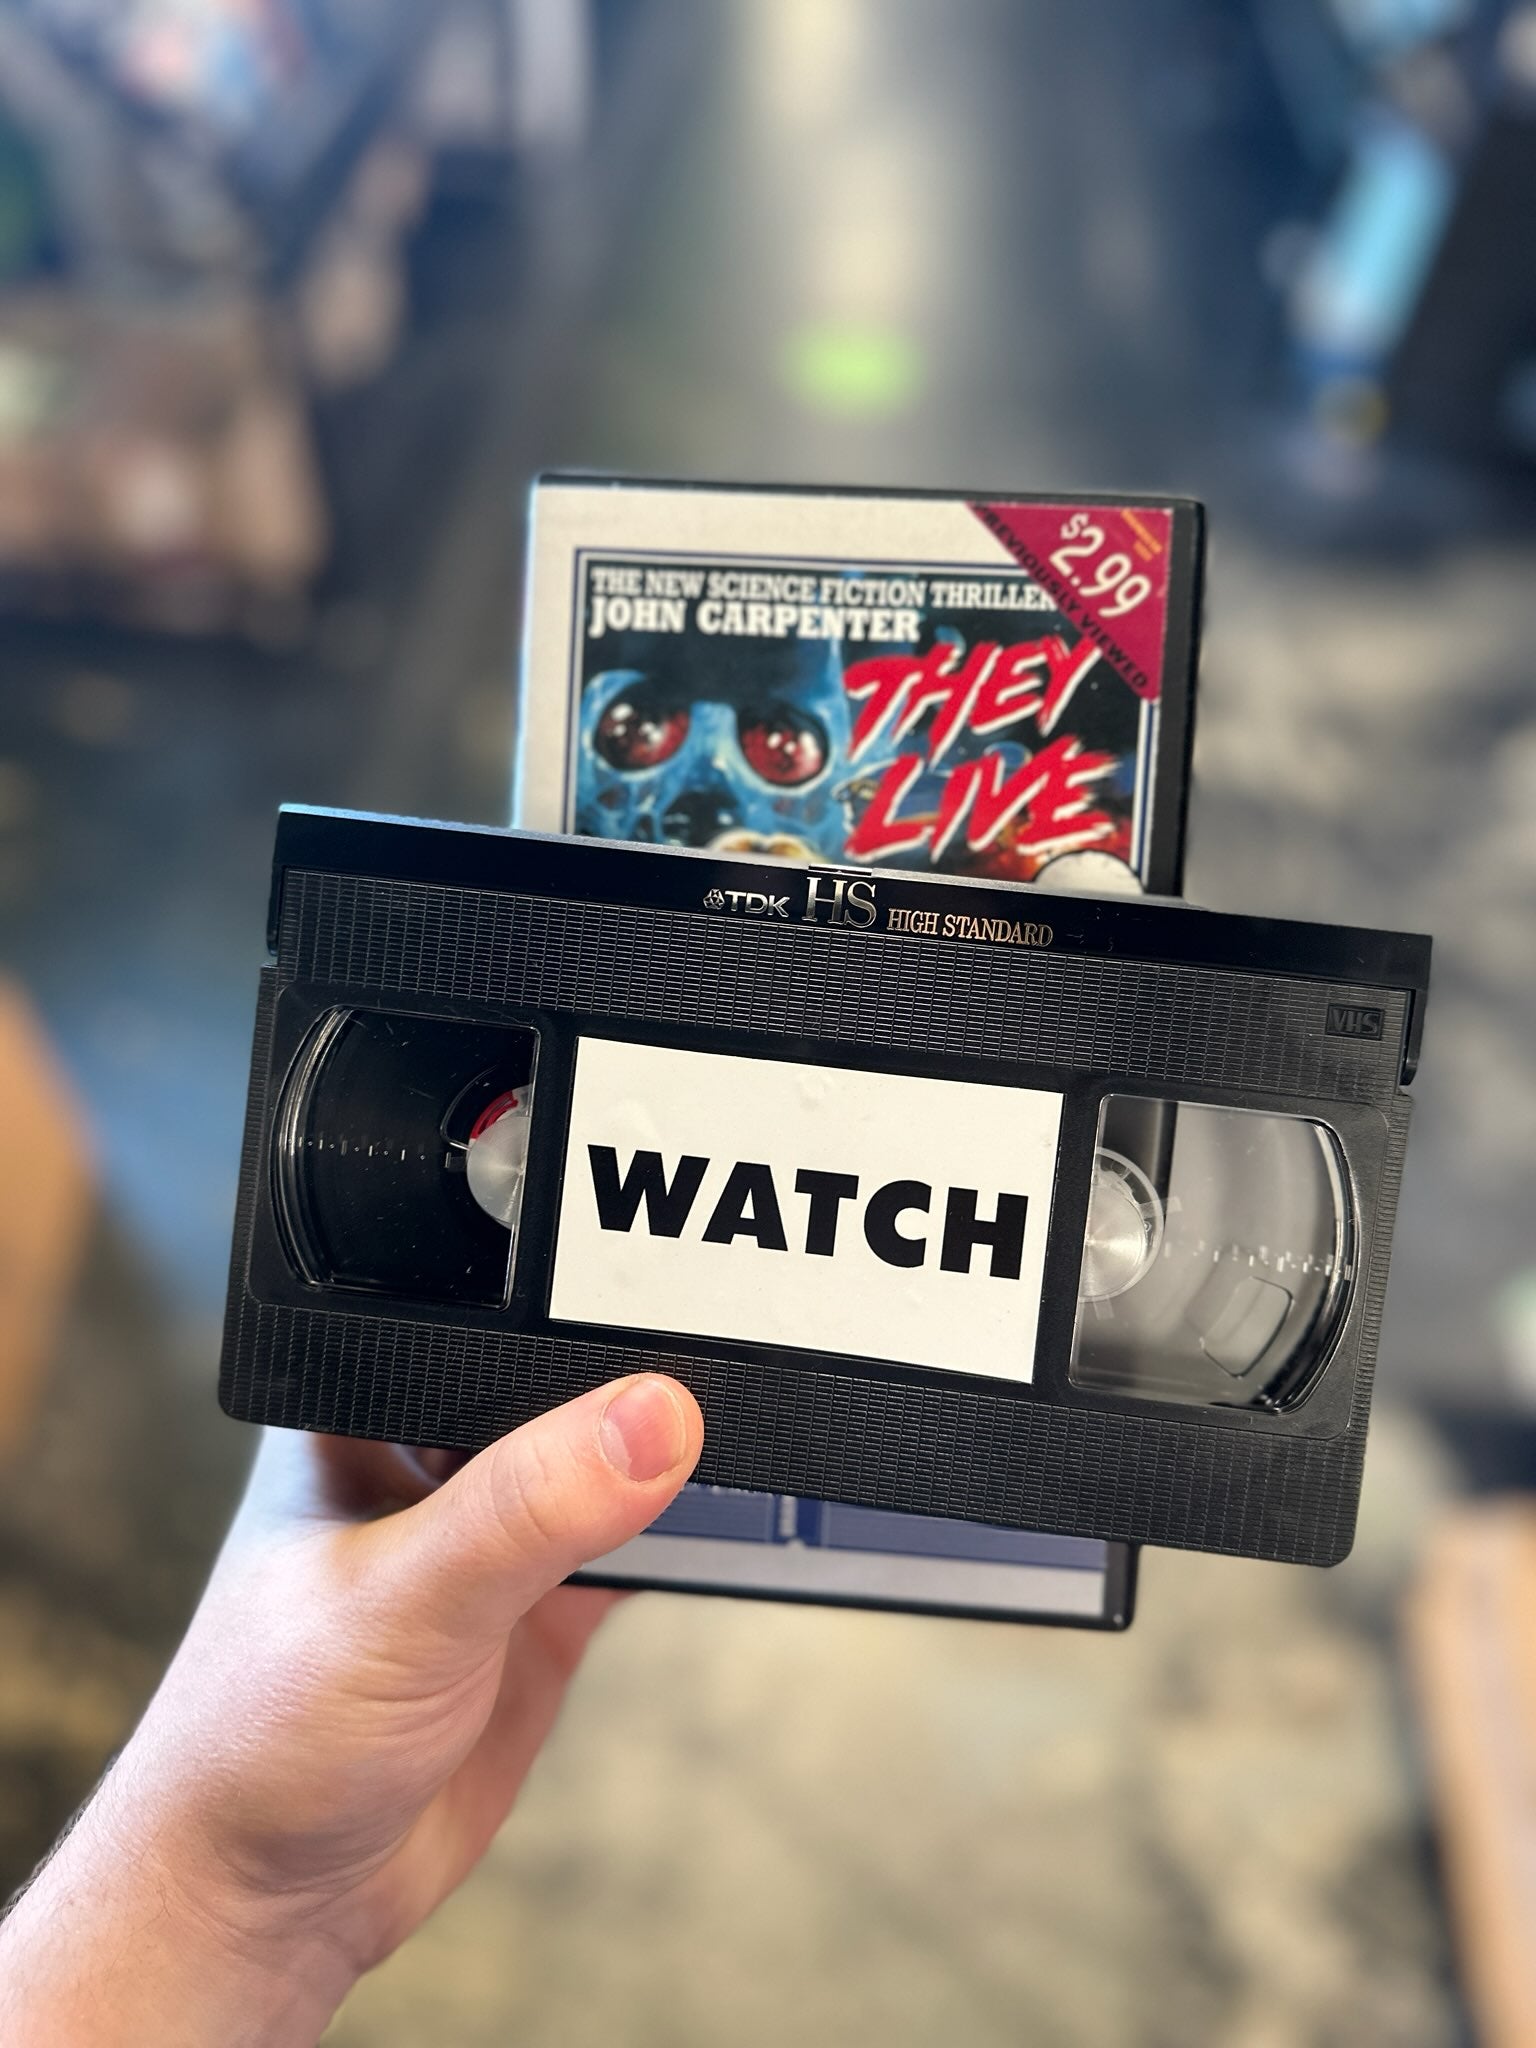 They Live (Brainbuster Video)